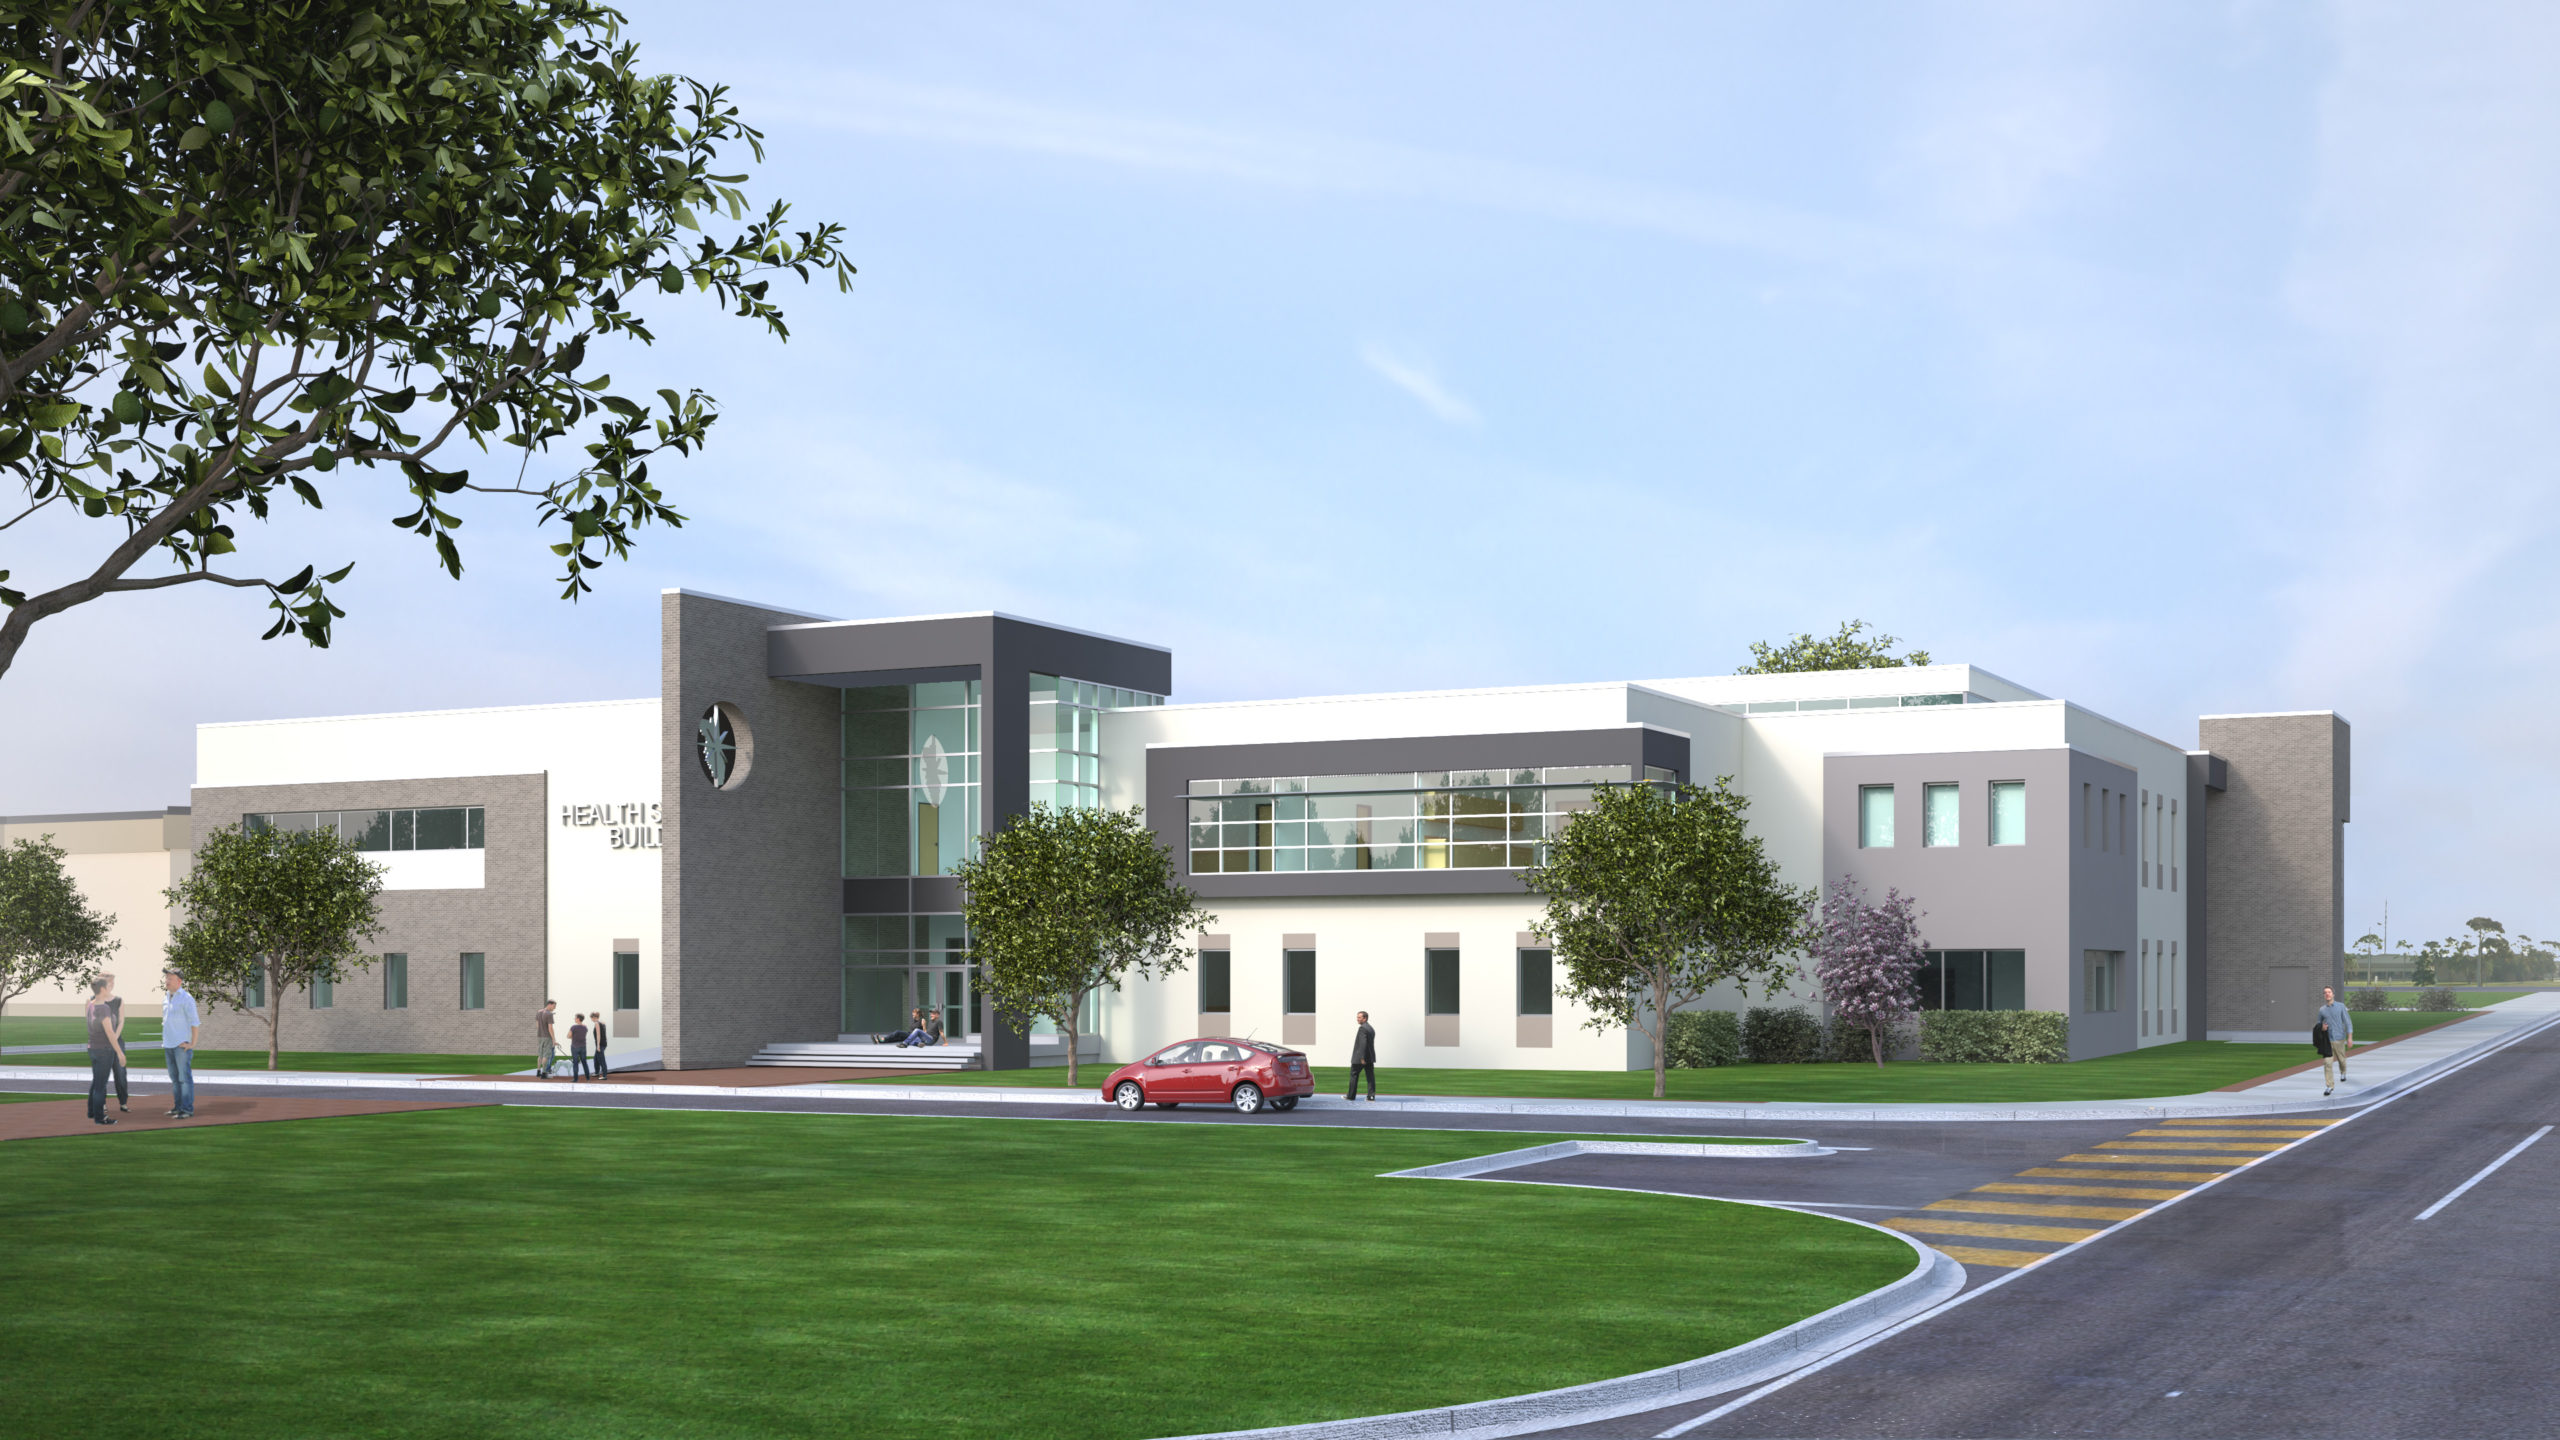 GO to Ajax Building Corporation Breaks Ground On Eastern Florida State College Health Sciences Institute